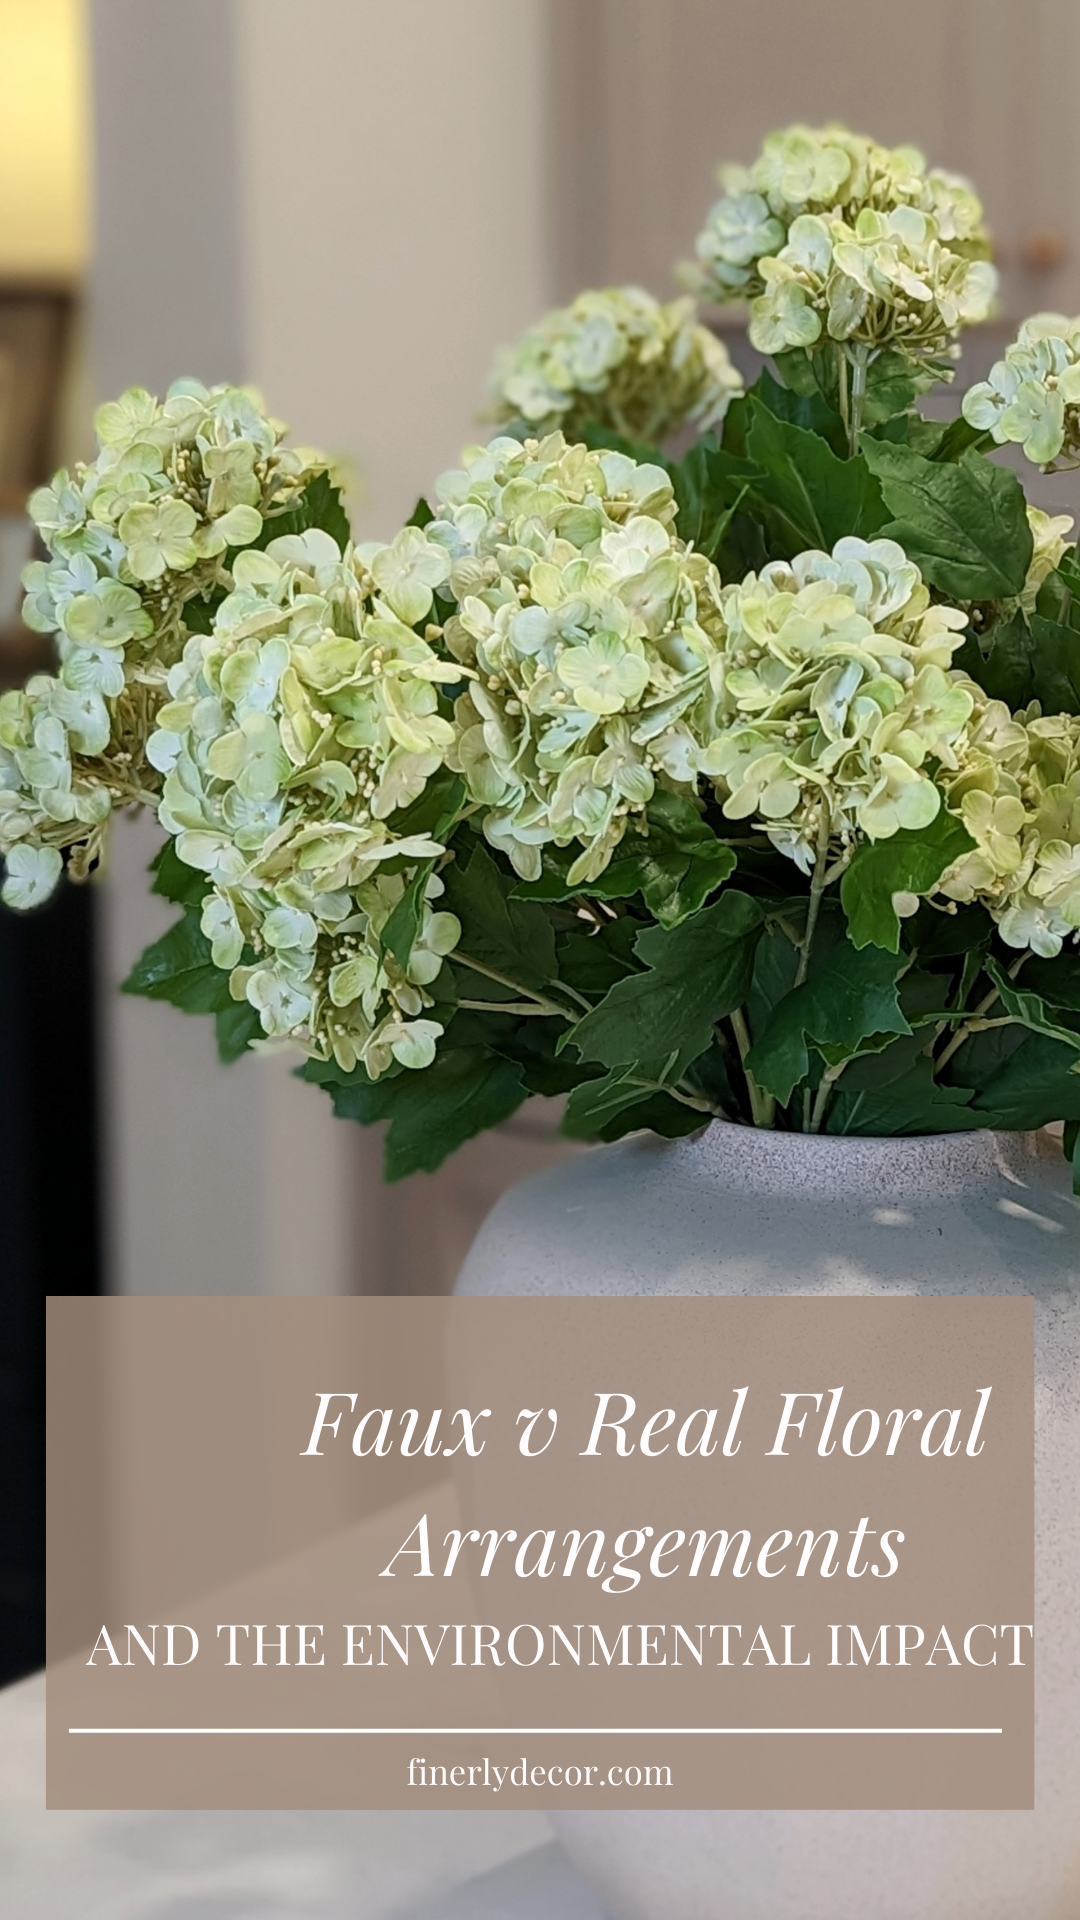 Image with text overlay: Faux v Real floral arrangements and the environmental impact. 